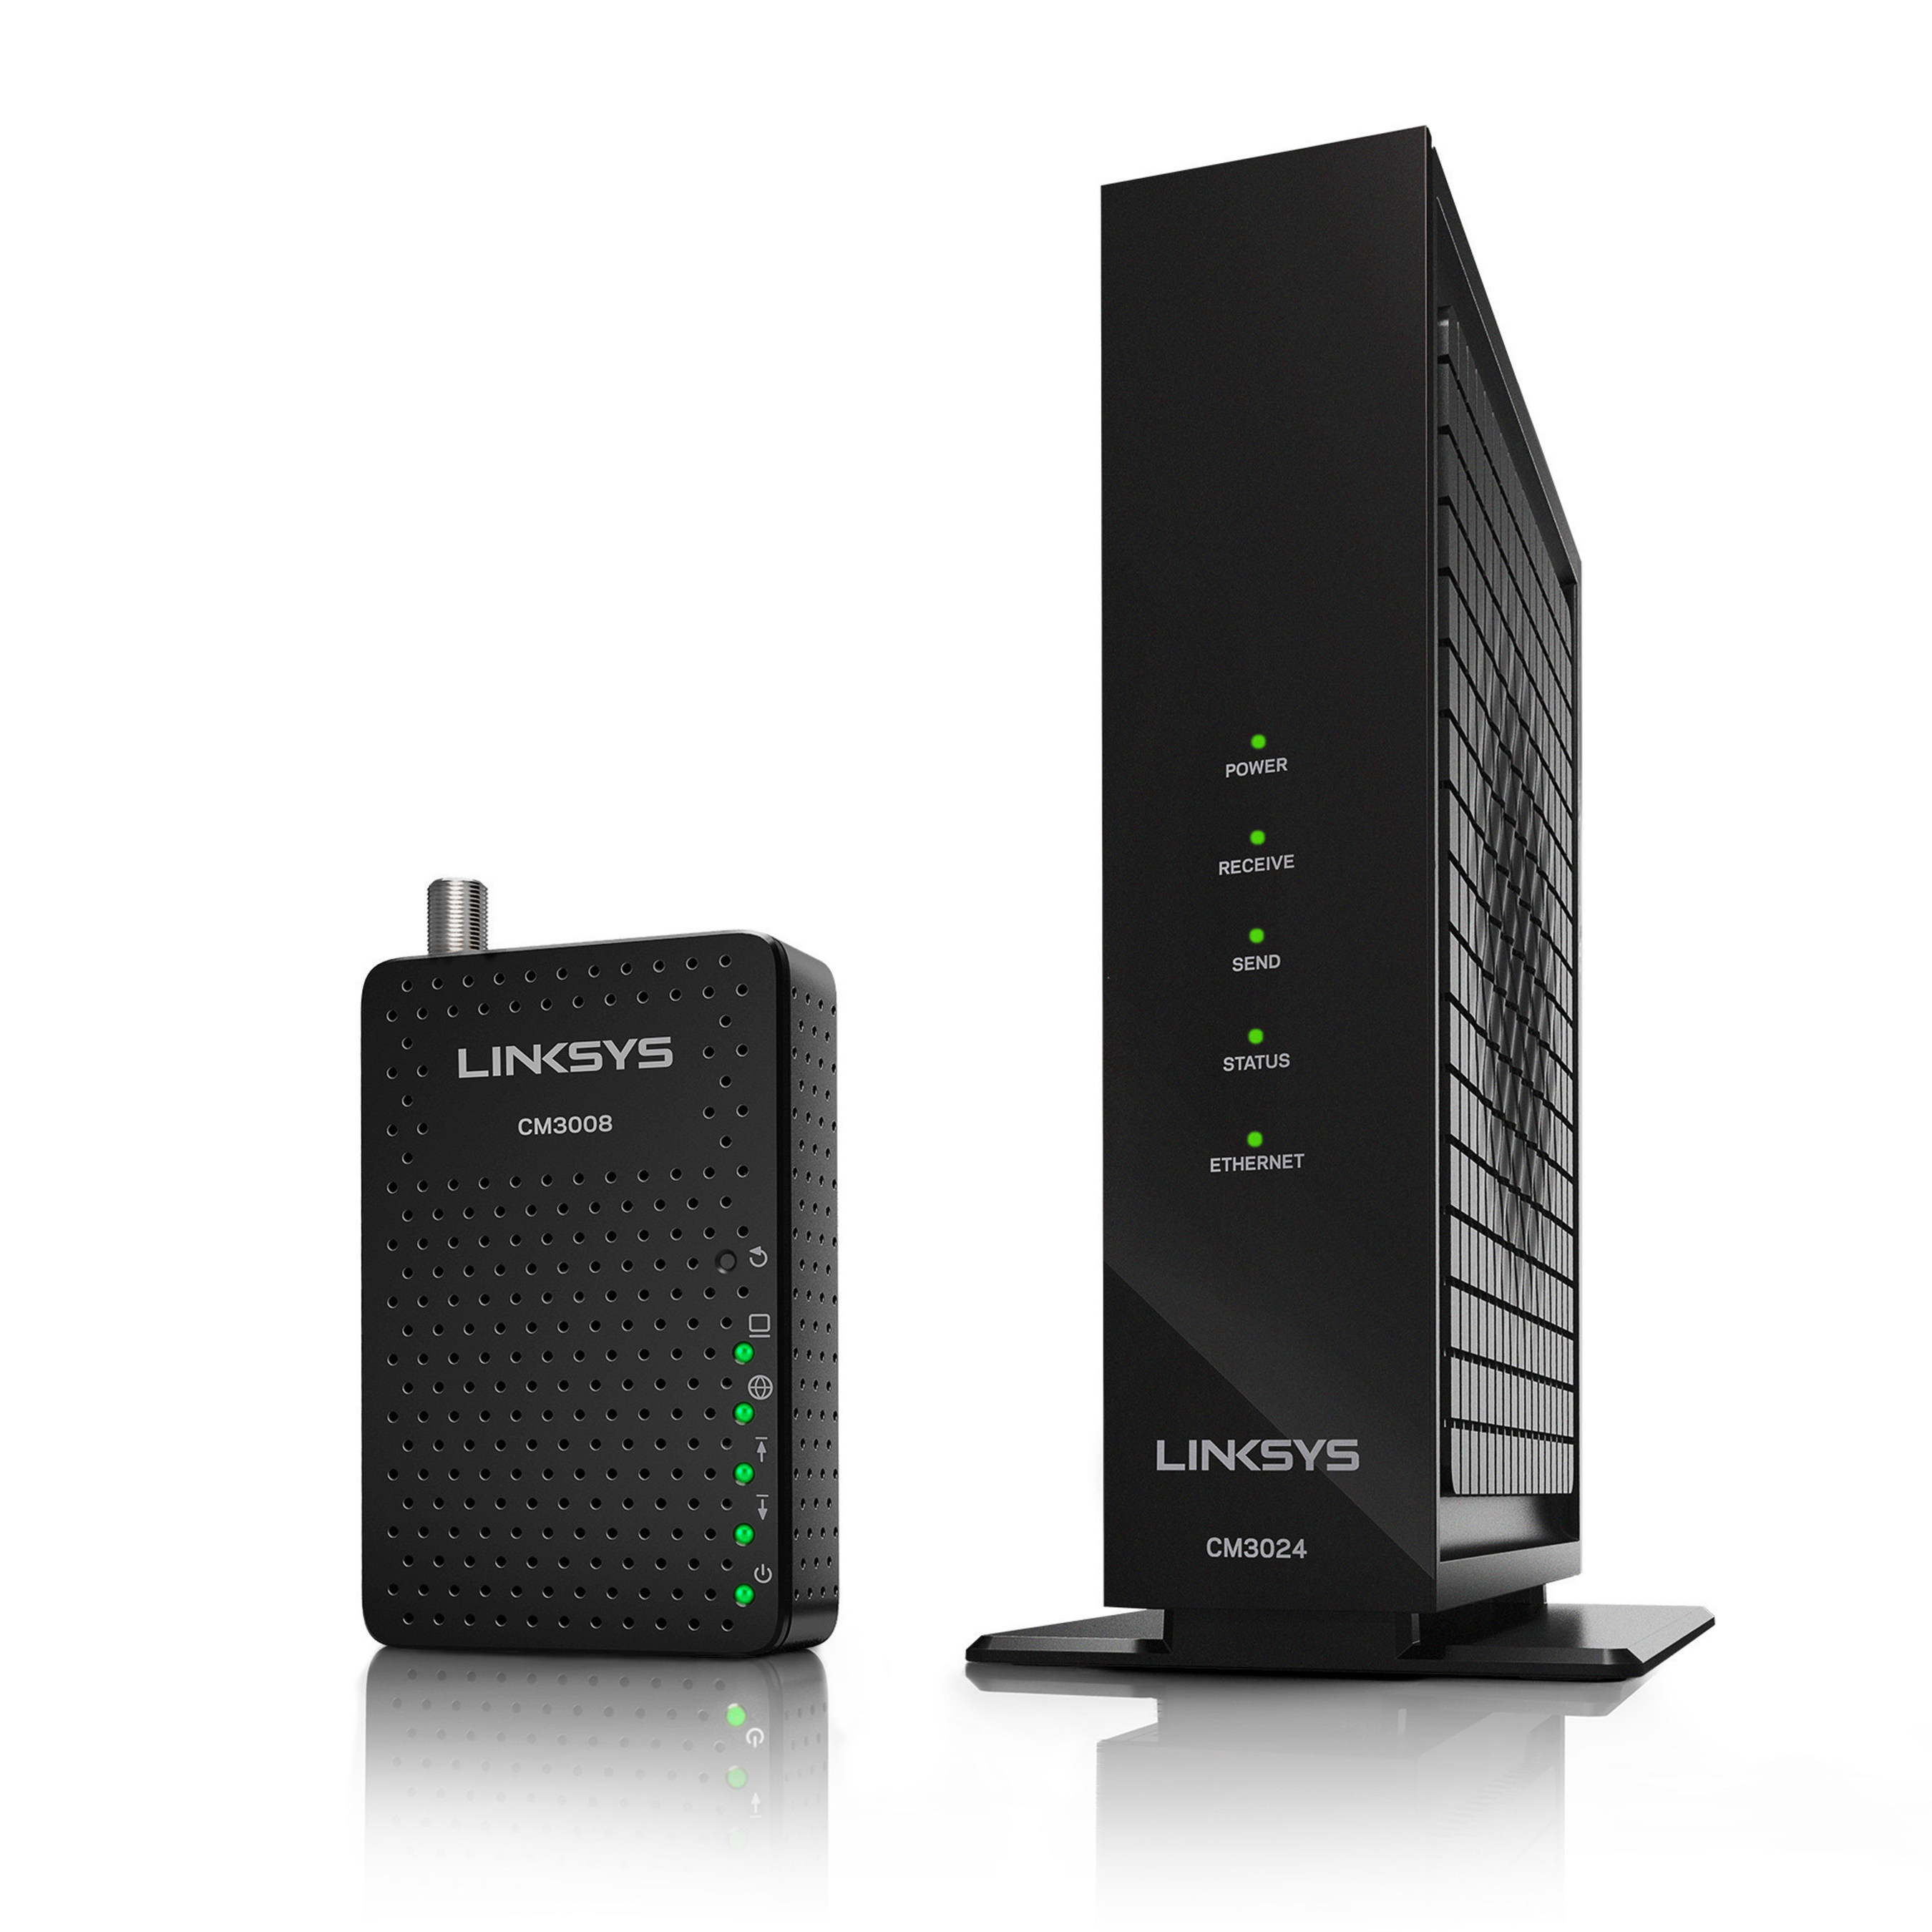 Linksys 8X4 and 24X8 Cable Modems (CM3008 and CM3024)